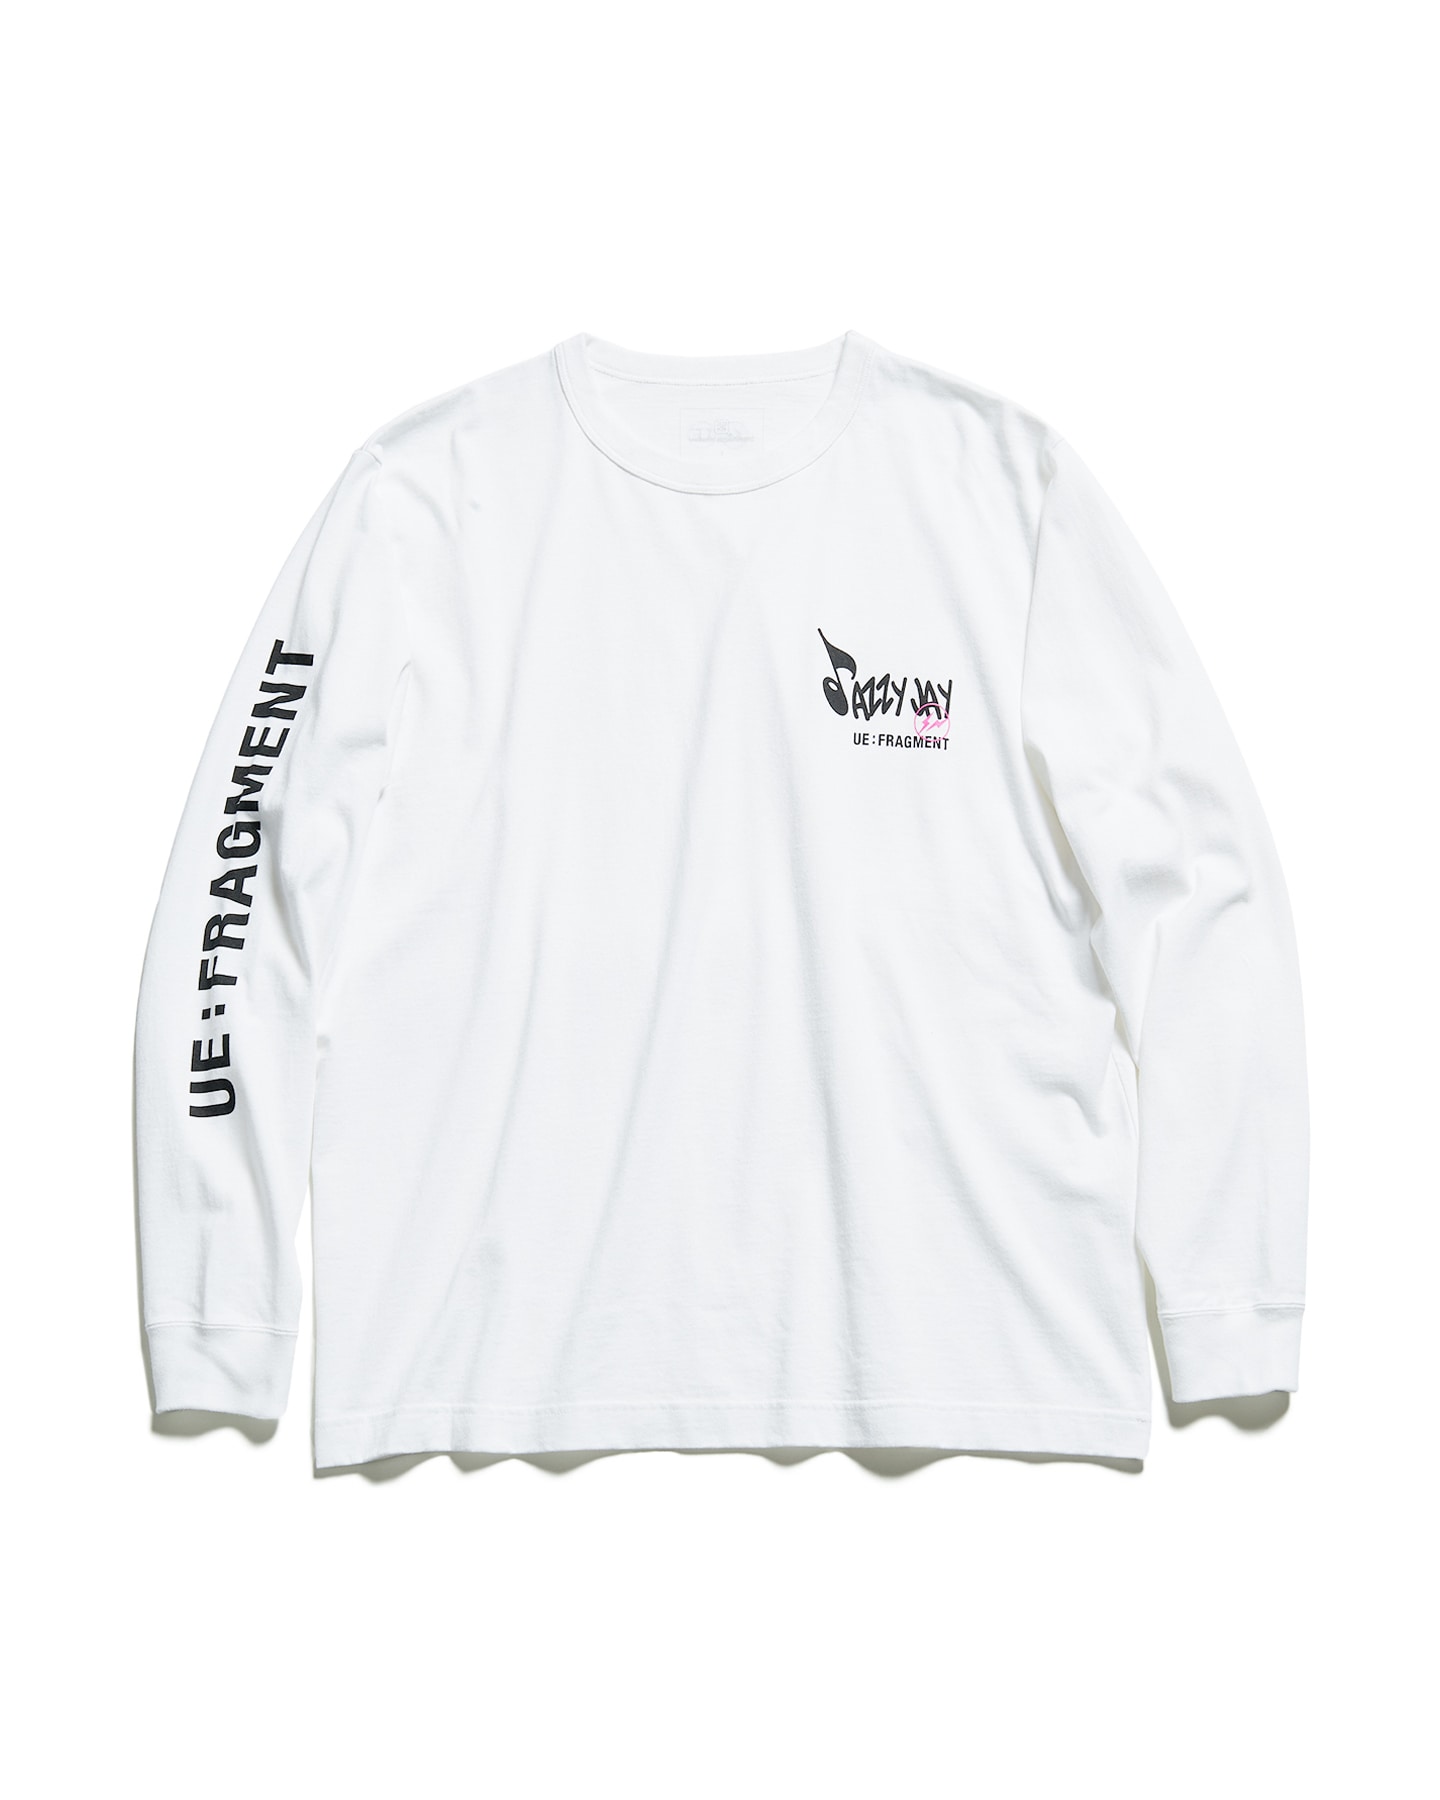 SOPH. | FRAGMENT : JAZZY JAY / JAZZY 5 L/S TEE(2 WHITE):